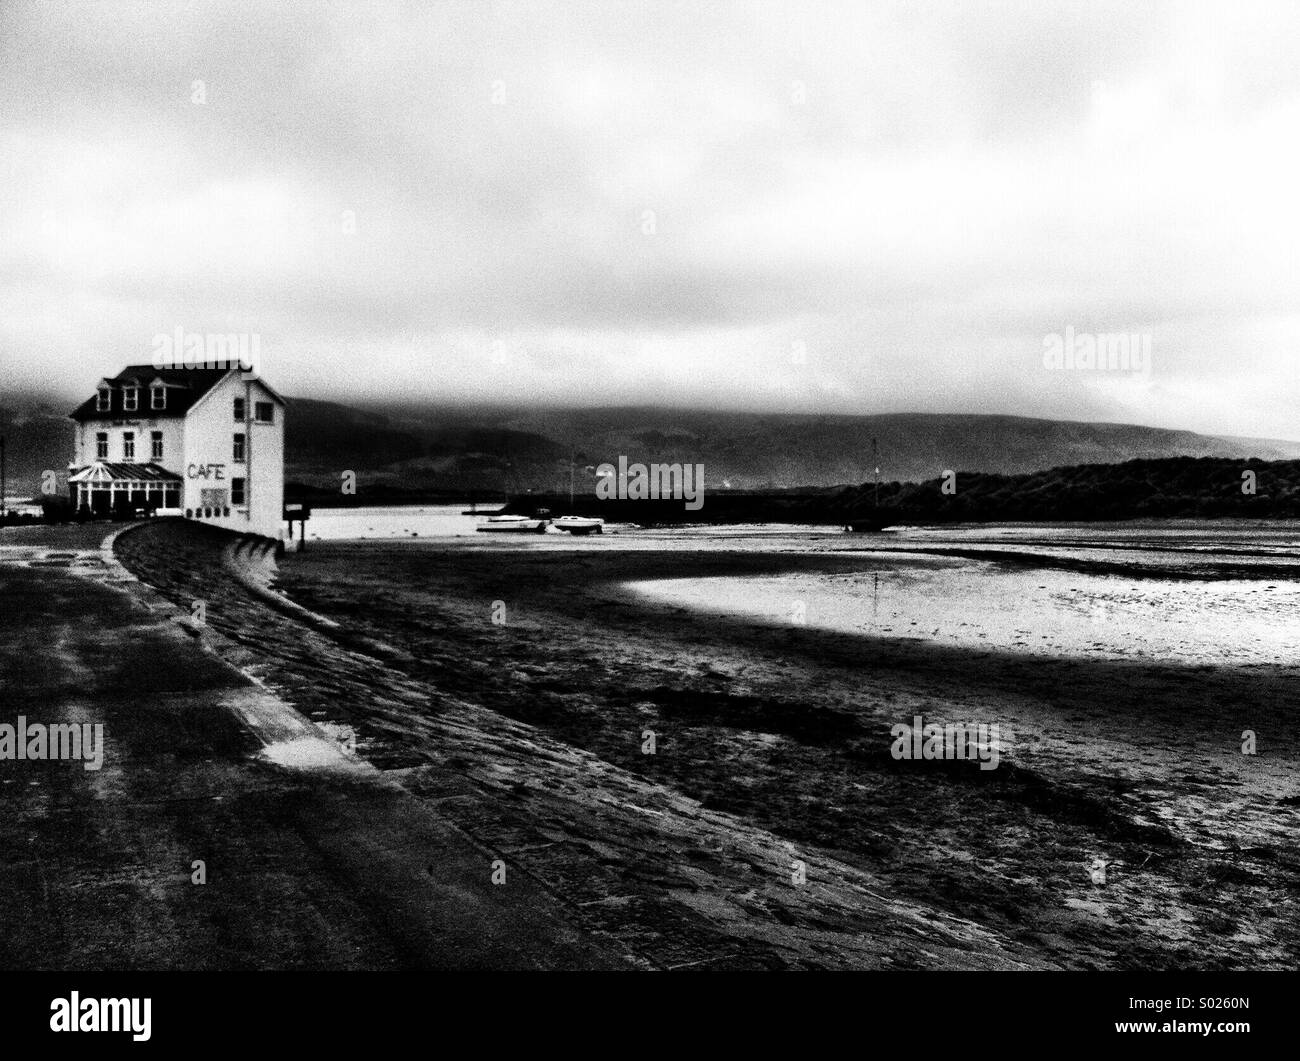 Cafe at Barmouth beach, Wales (black and white) Stock Photo